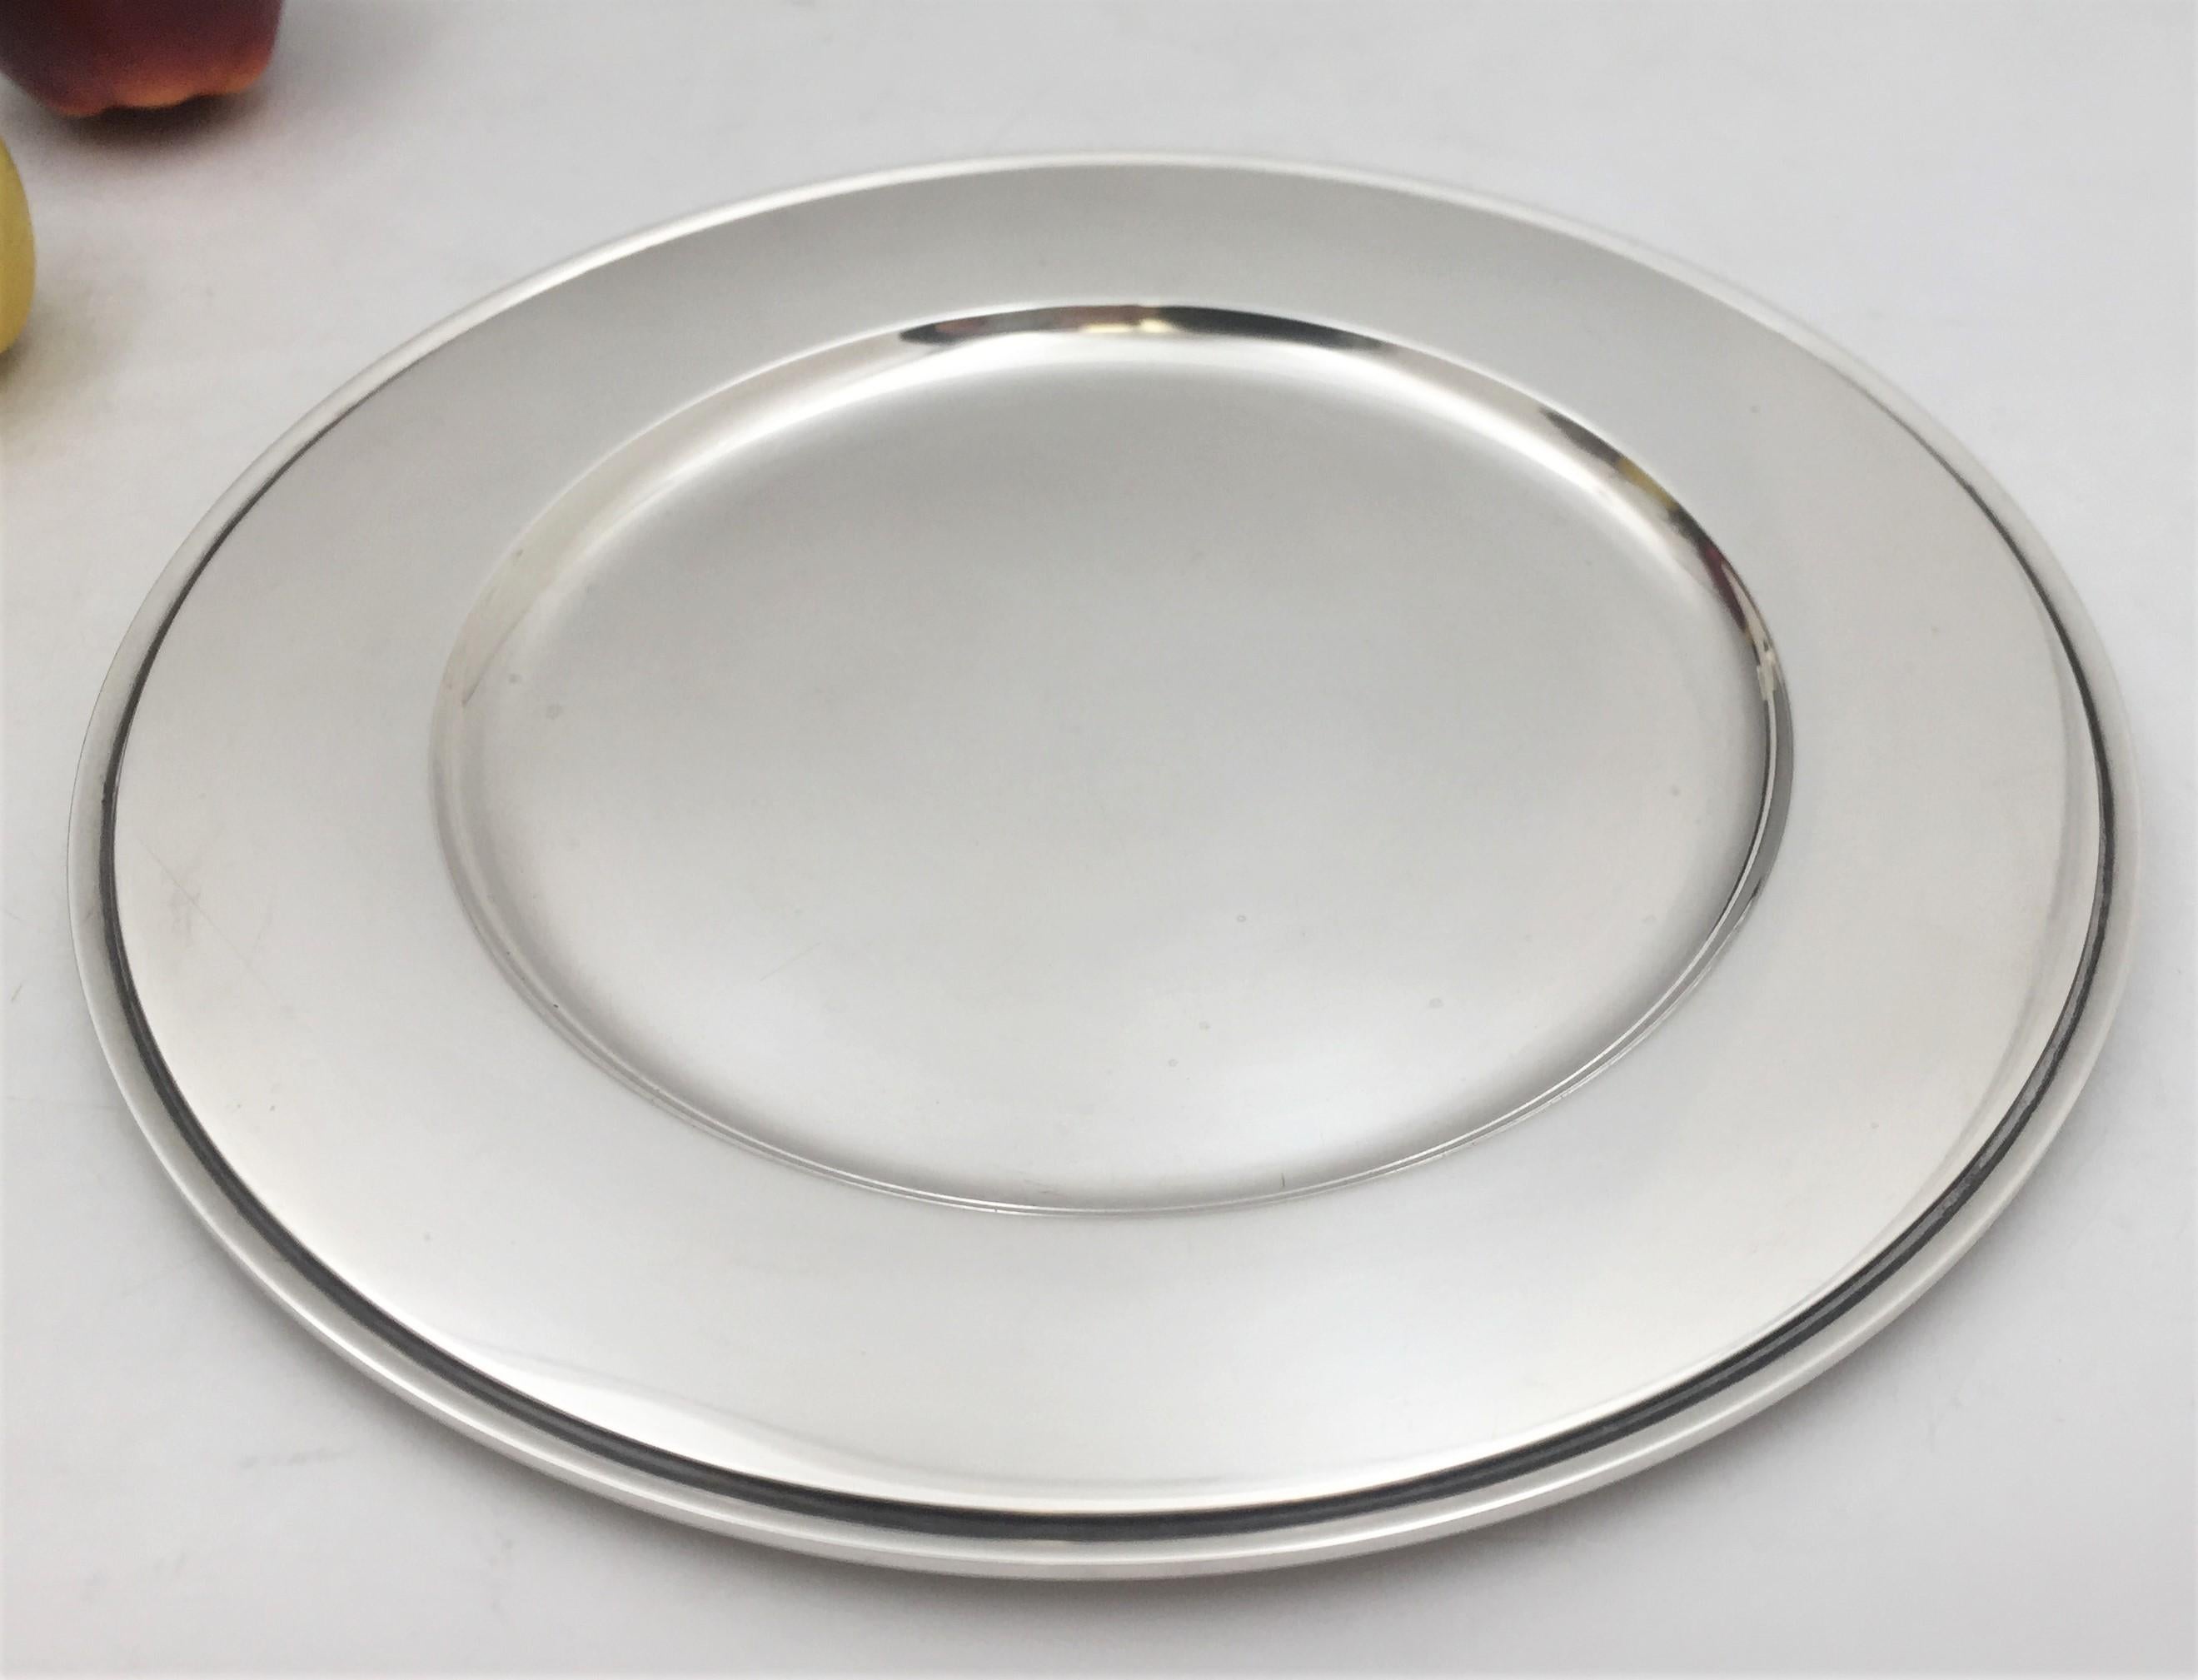 Georg Jensen sterling silver charger / plate in Pyramid pattern number 600Y, designed by Harald Nielsen, with a beautiful geometric design aligned with the Mid-Century Modern style, made between 1915 and 1930. It measures 11'' in diameter by 1/2''